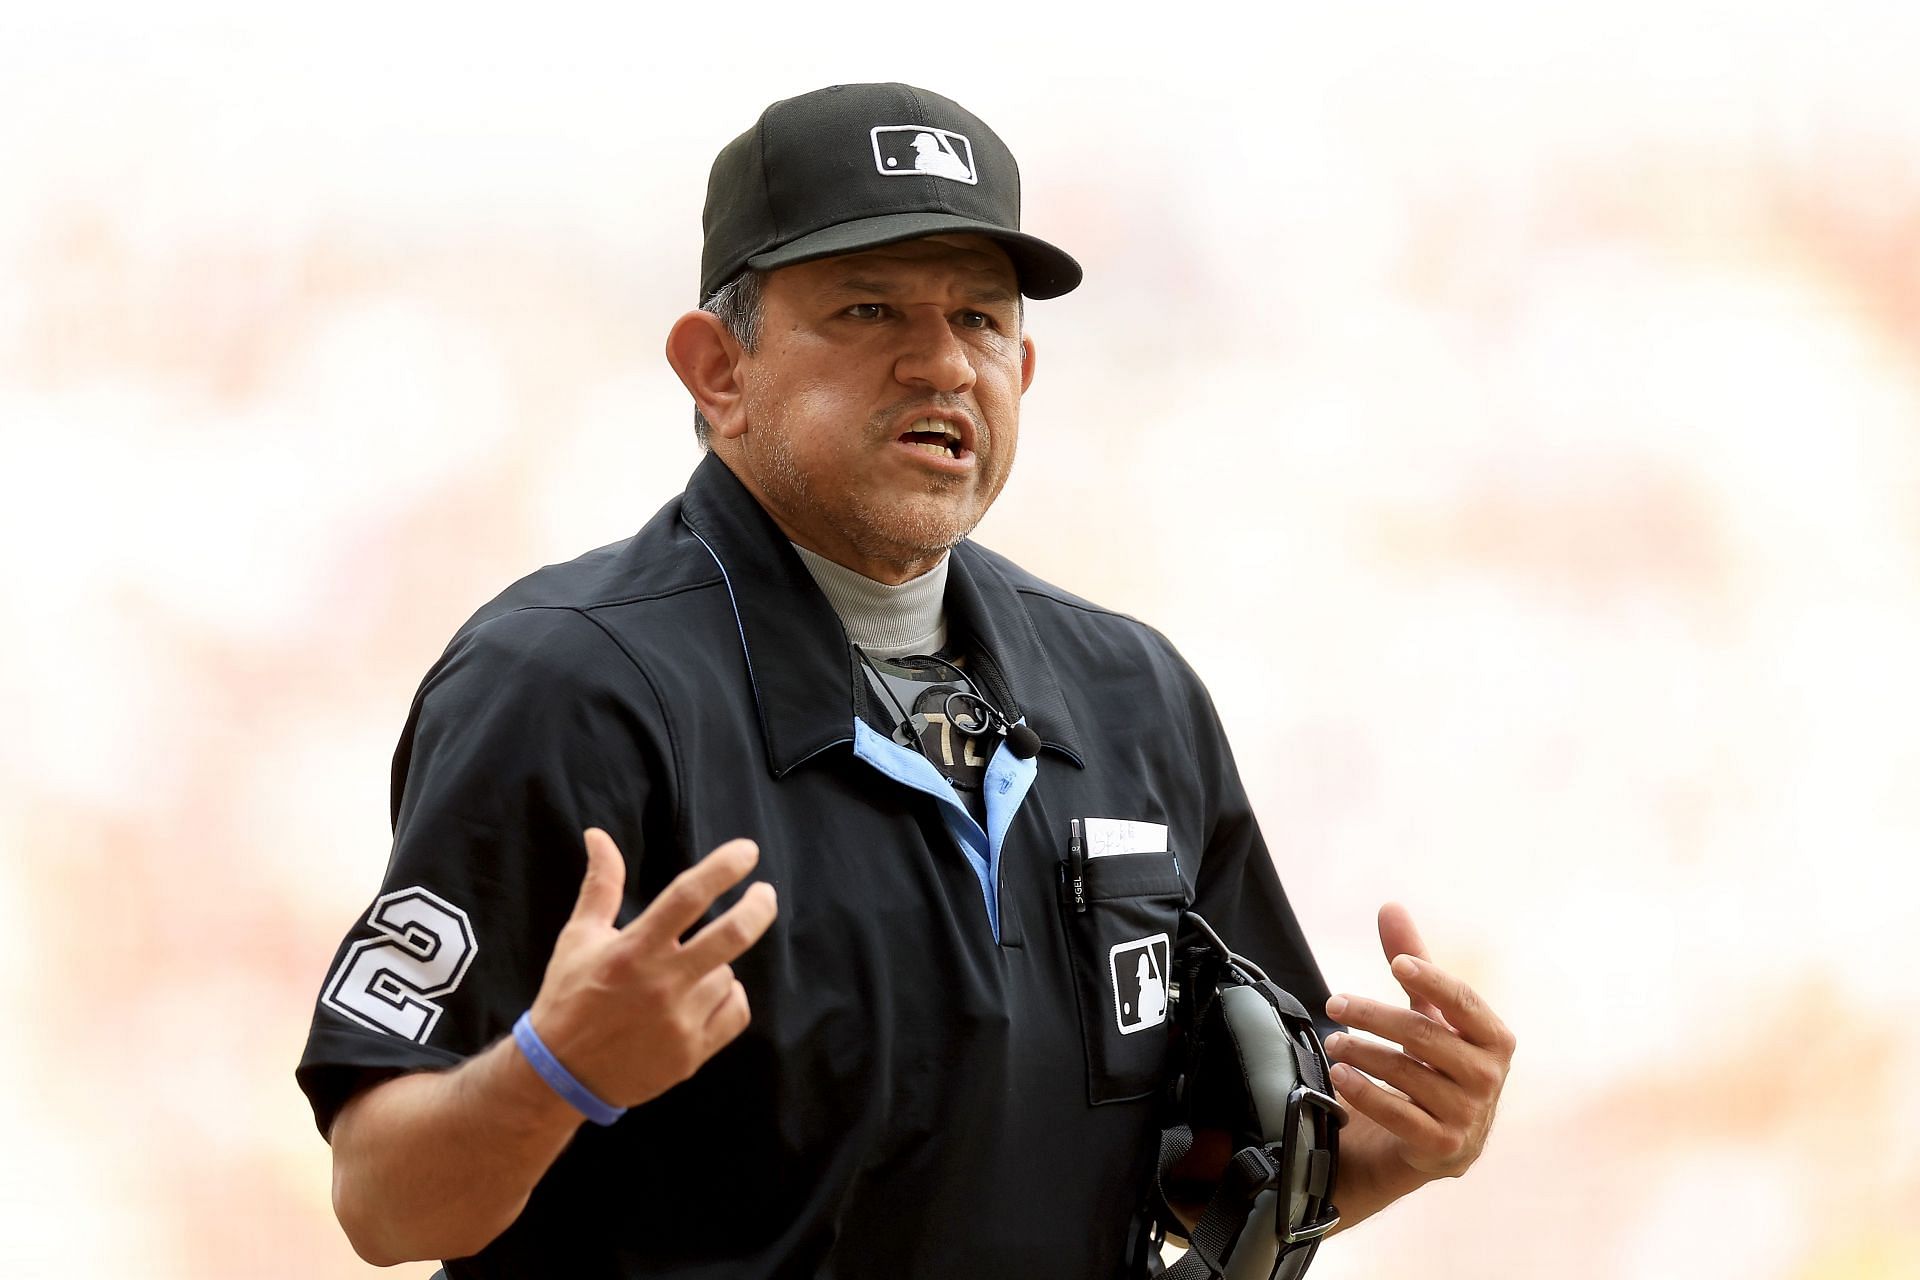 At last, MLB umpires will communicate with fans about replay reviews -  Bleed Cubbie Blue